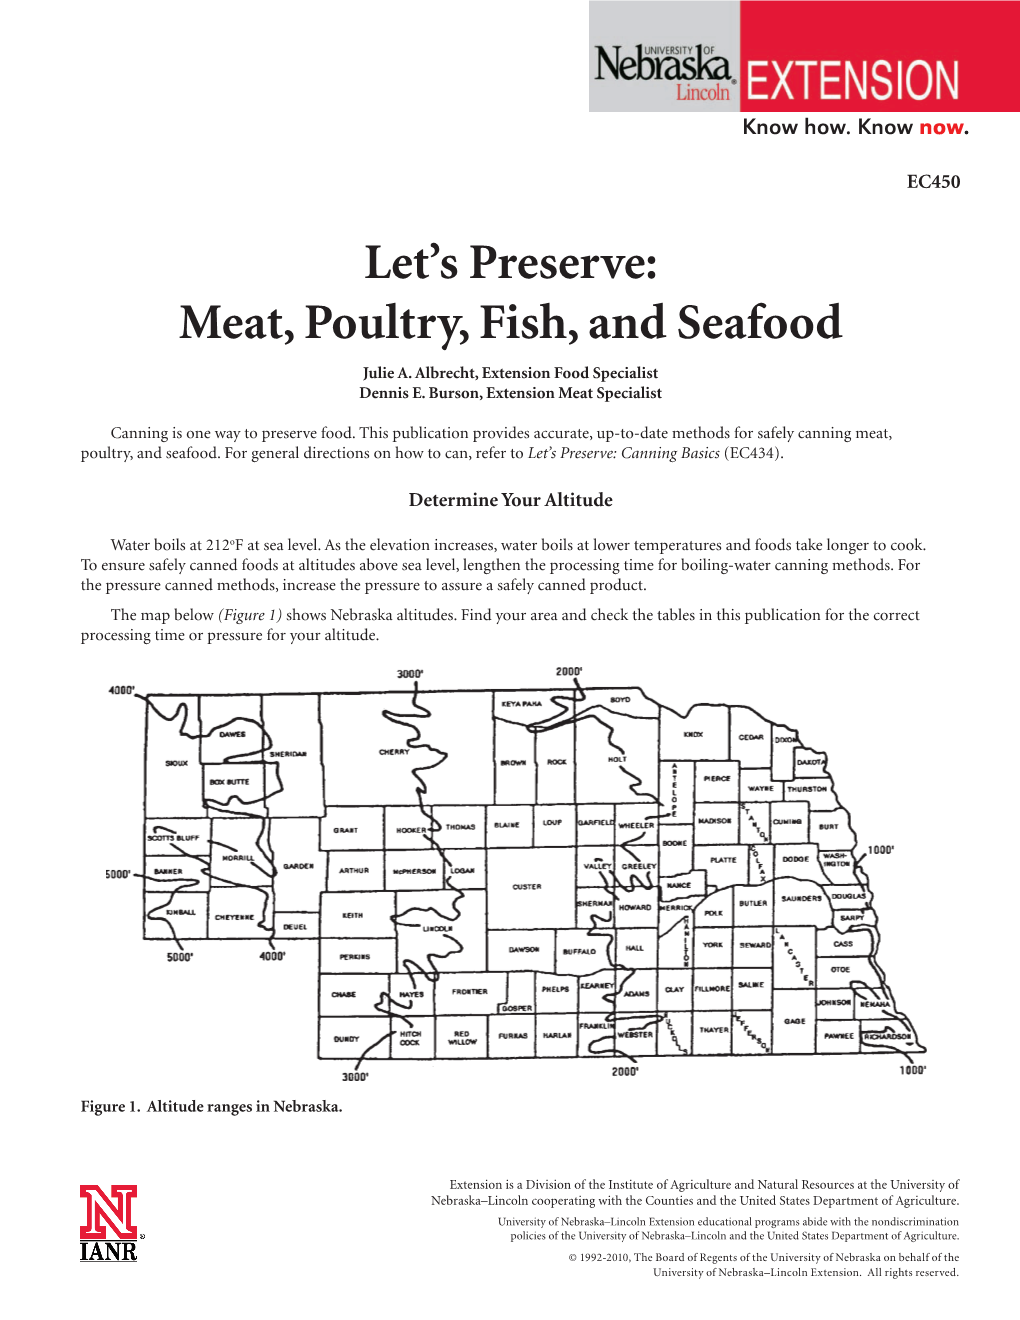 Let's Preserve: Meat, Poultry, Fish, and Seafood